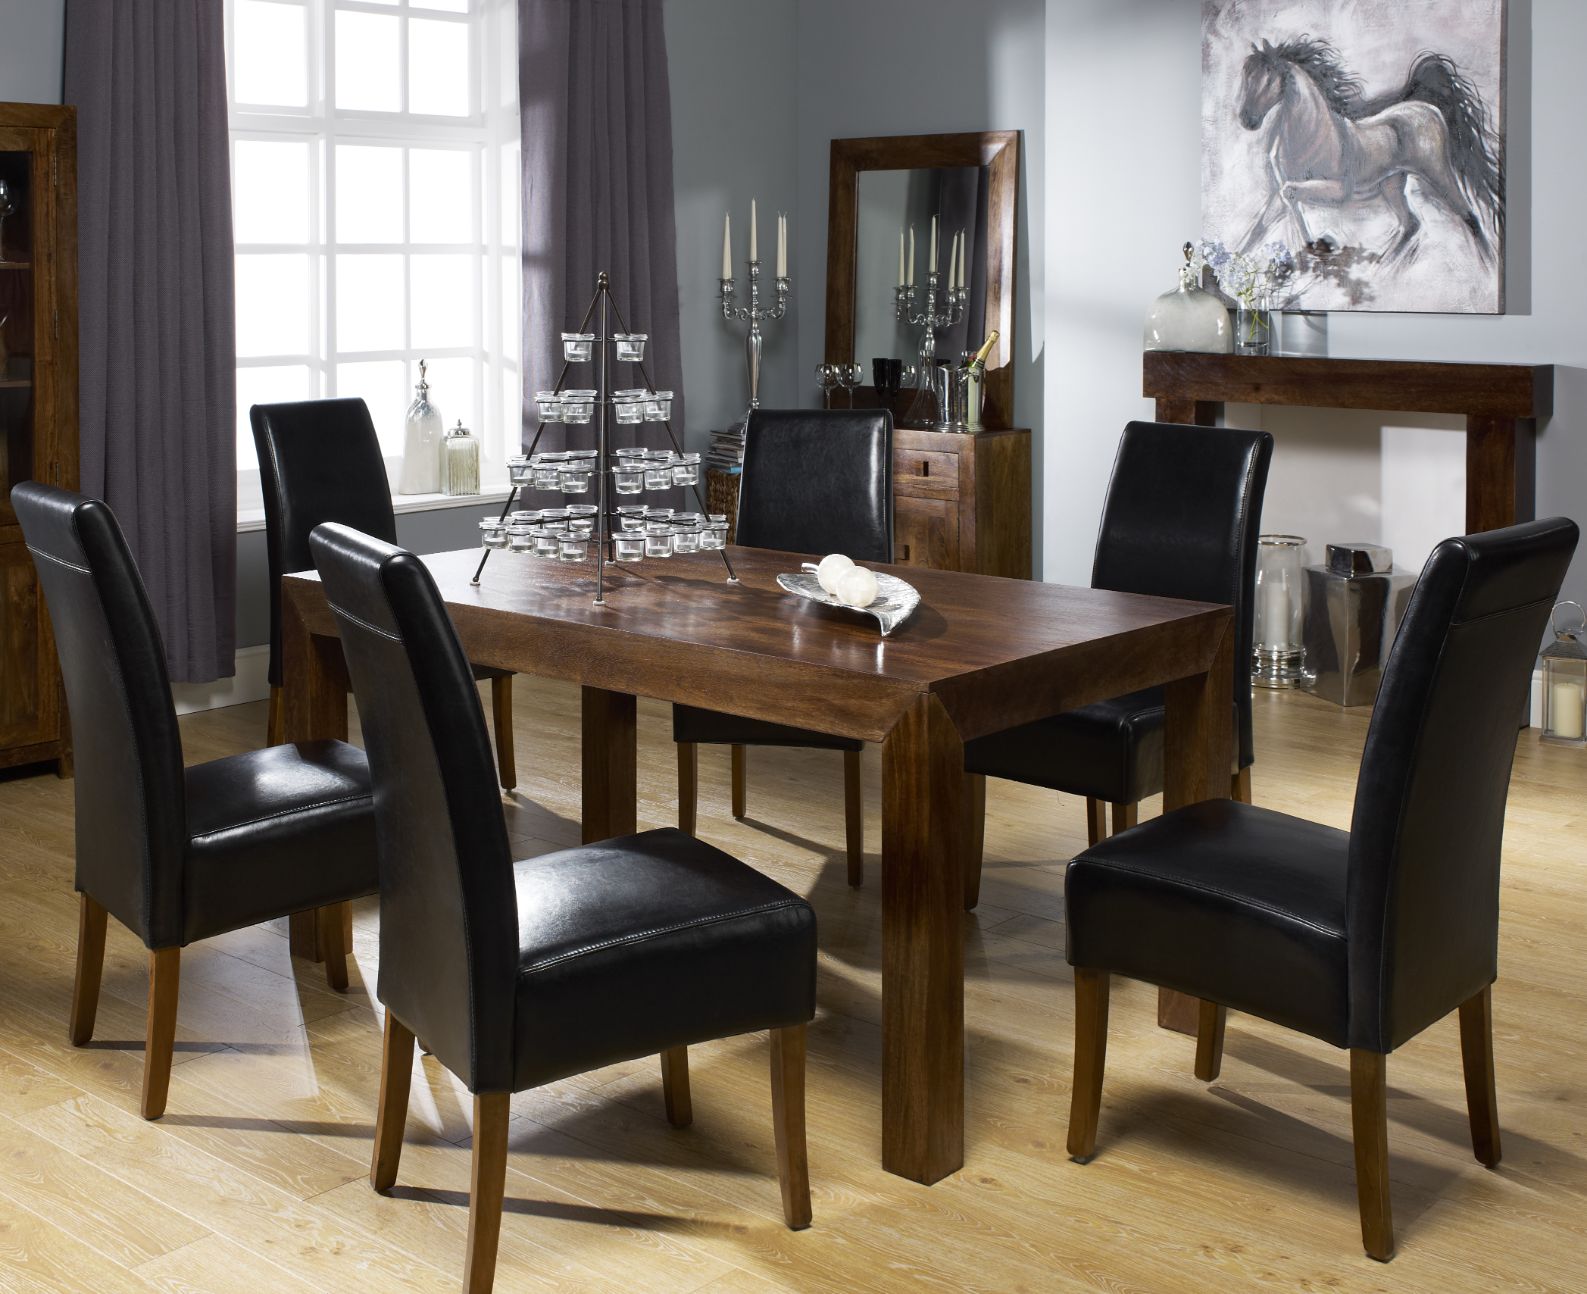 6 Chair Dining Sets